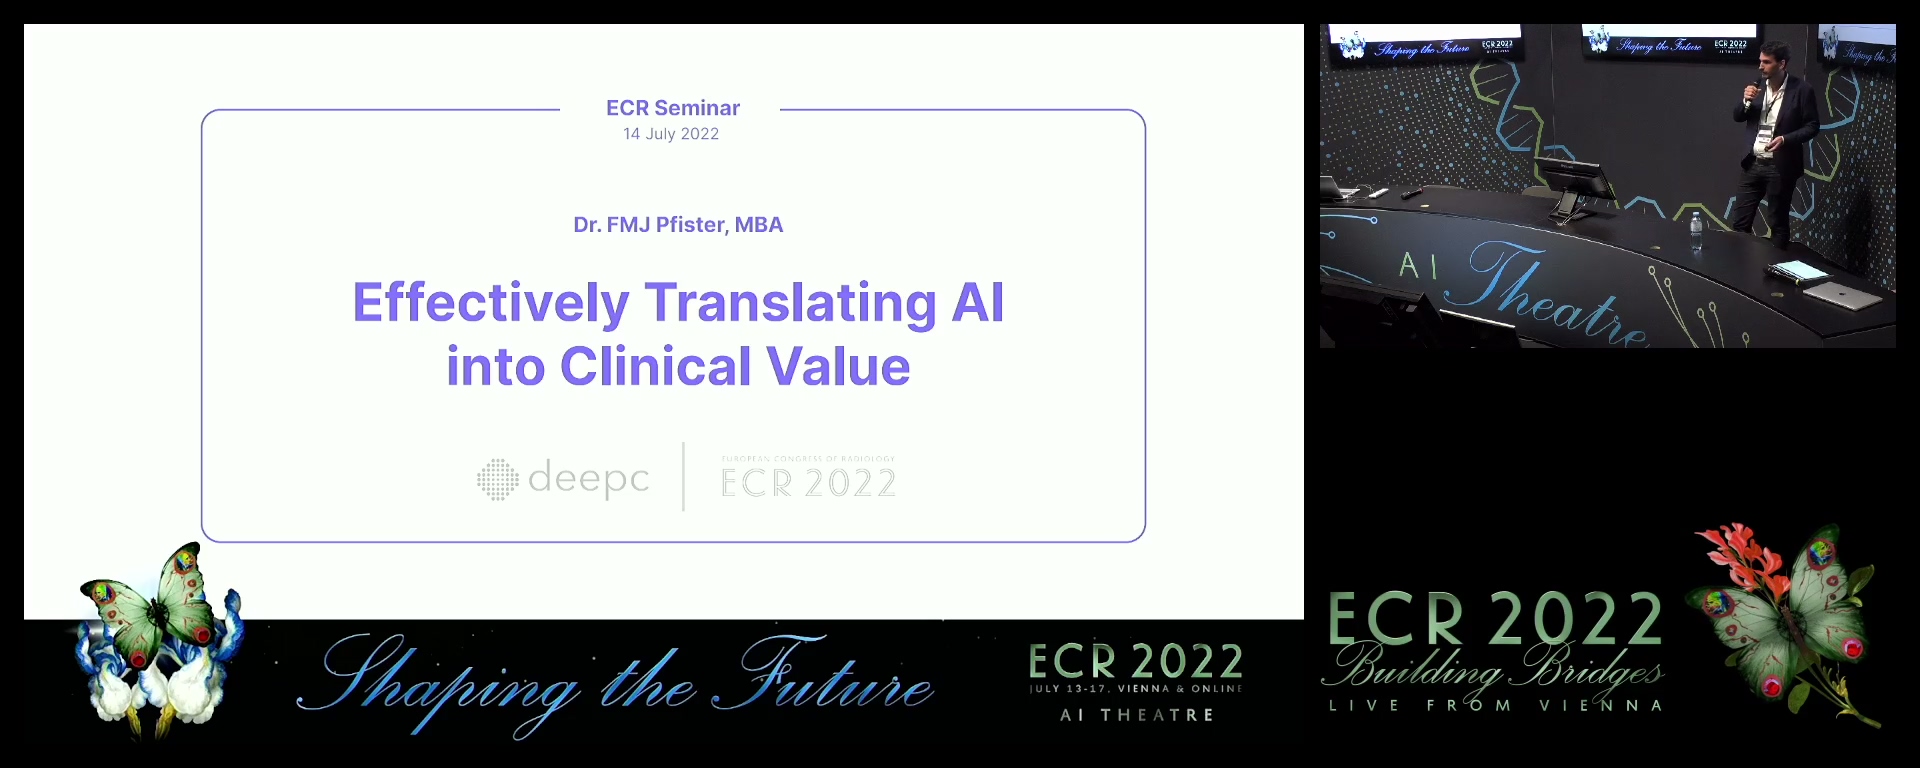 Effectively Translating AI into Clinical Value